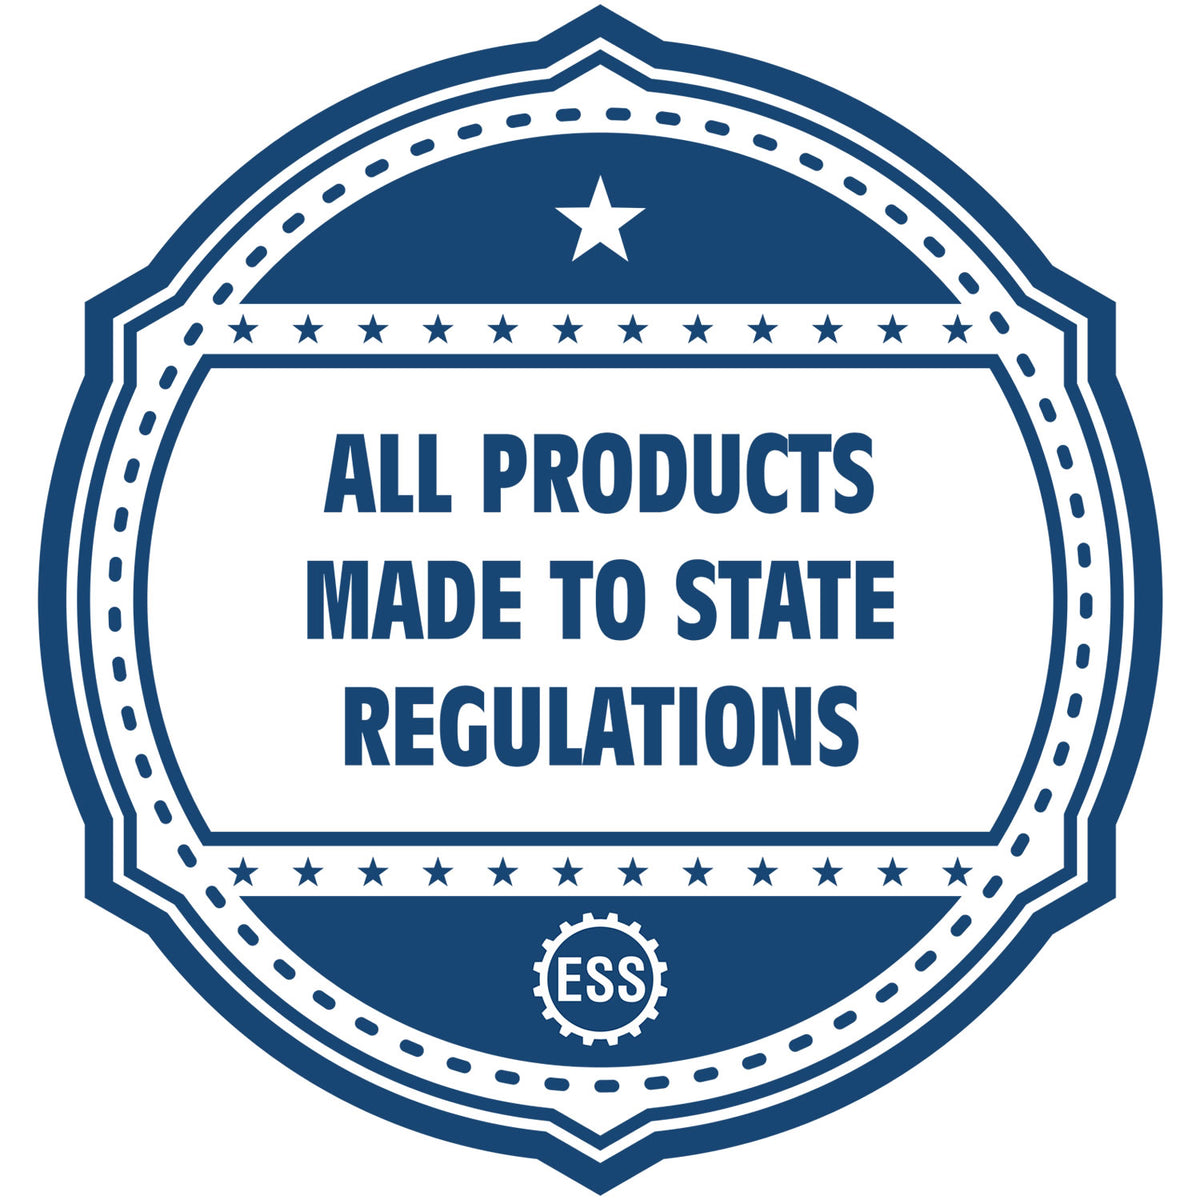 An icon or badge element for the Self-Inking Nebraska Landscape Architect Stamp showing that this product is made in compliance with state regulations.